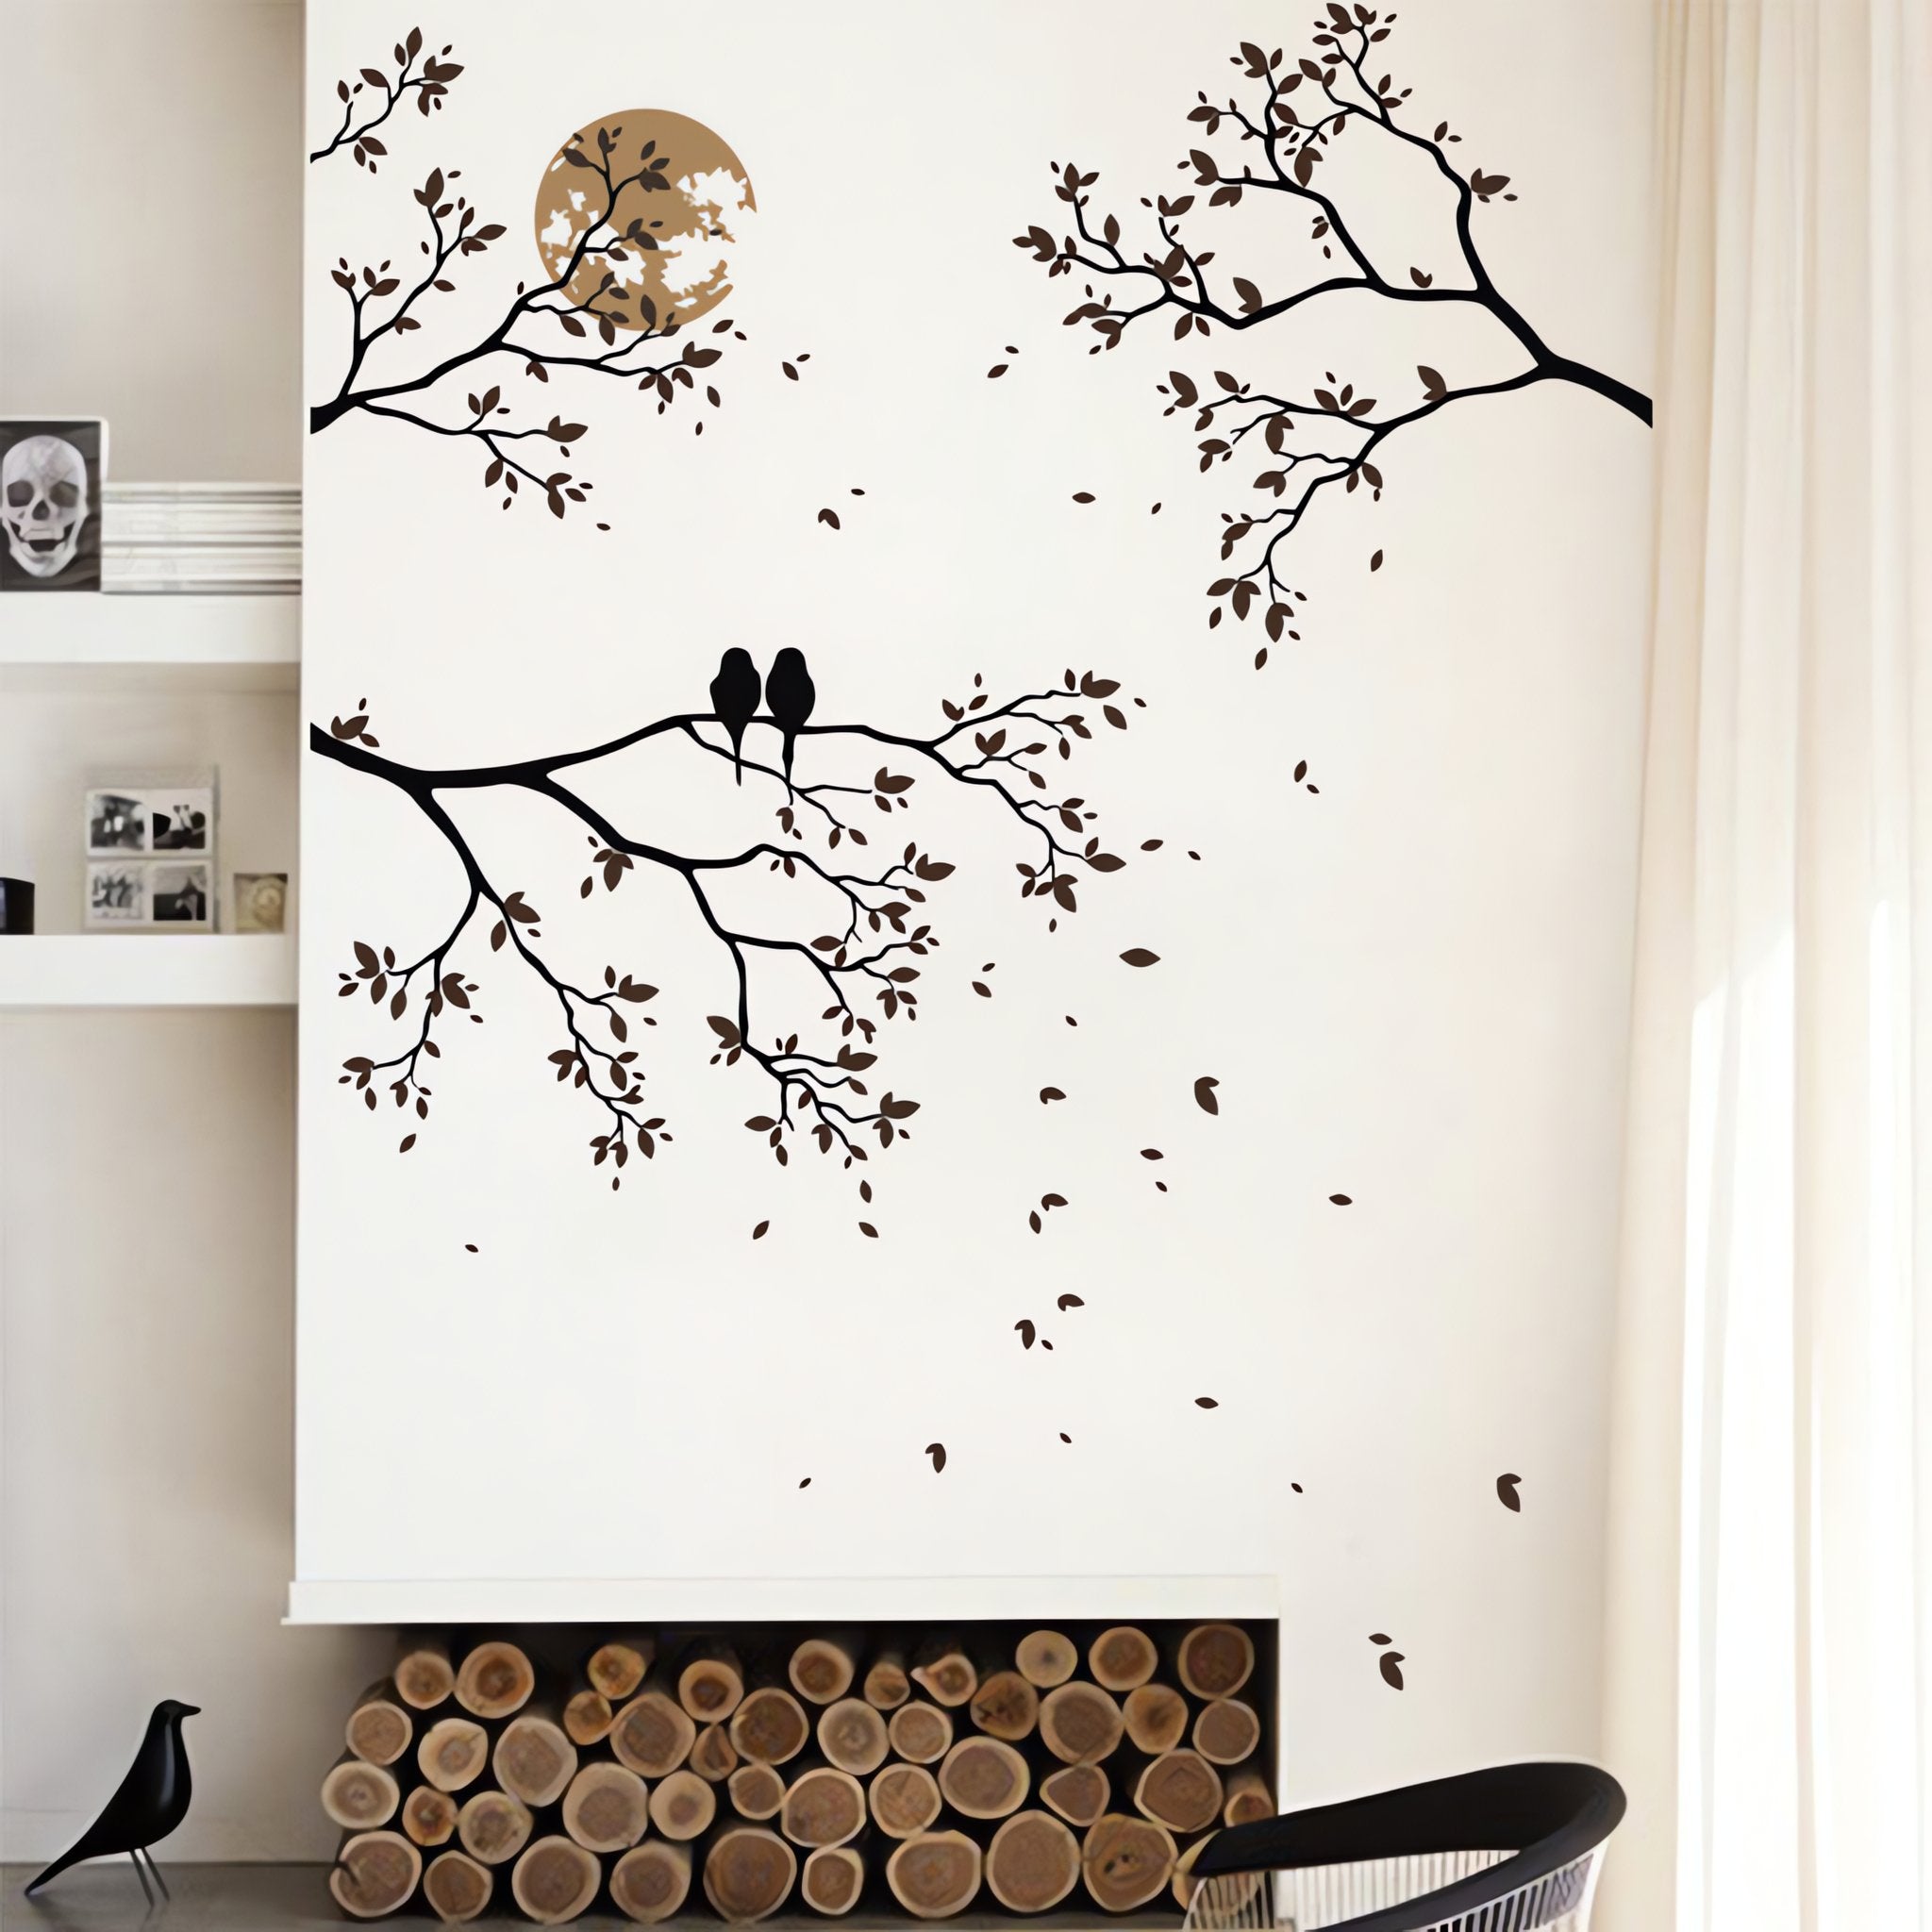 Tree wall sticker of 3 branches with 2 birds and the moon on a wall above some seating.